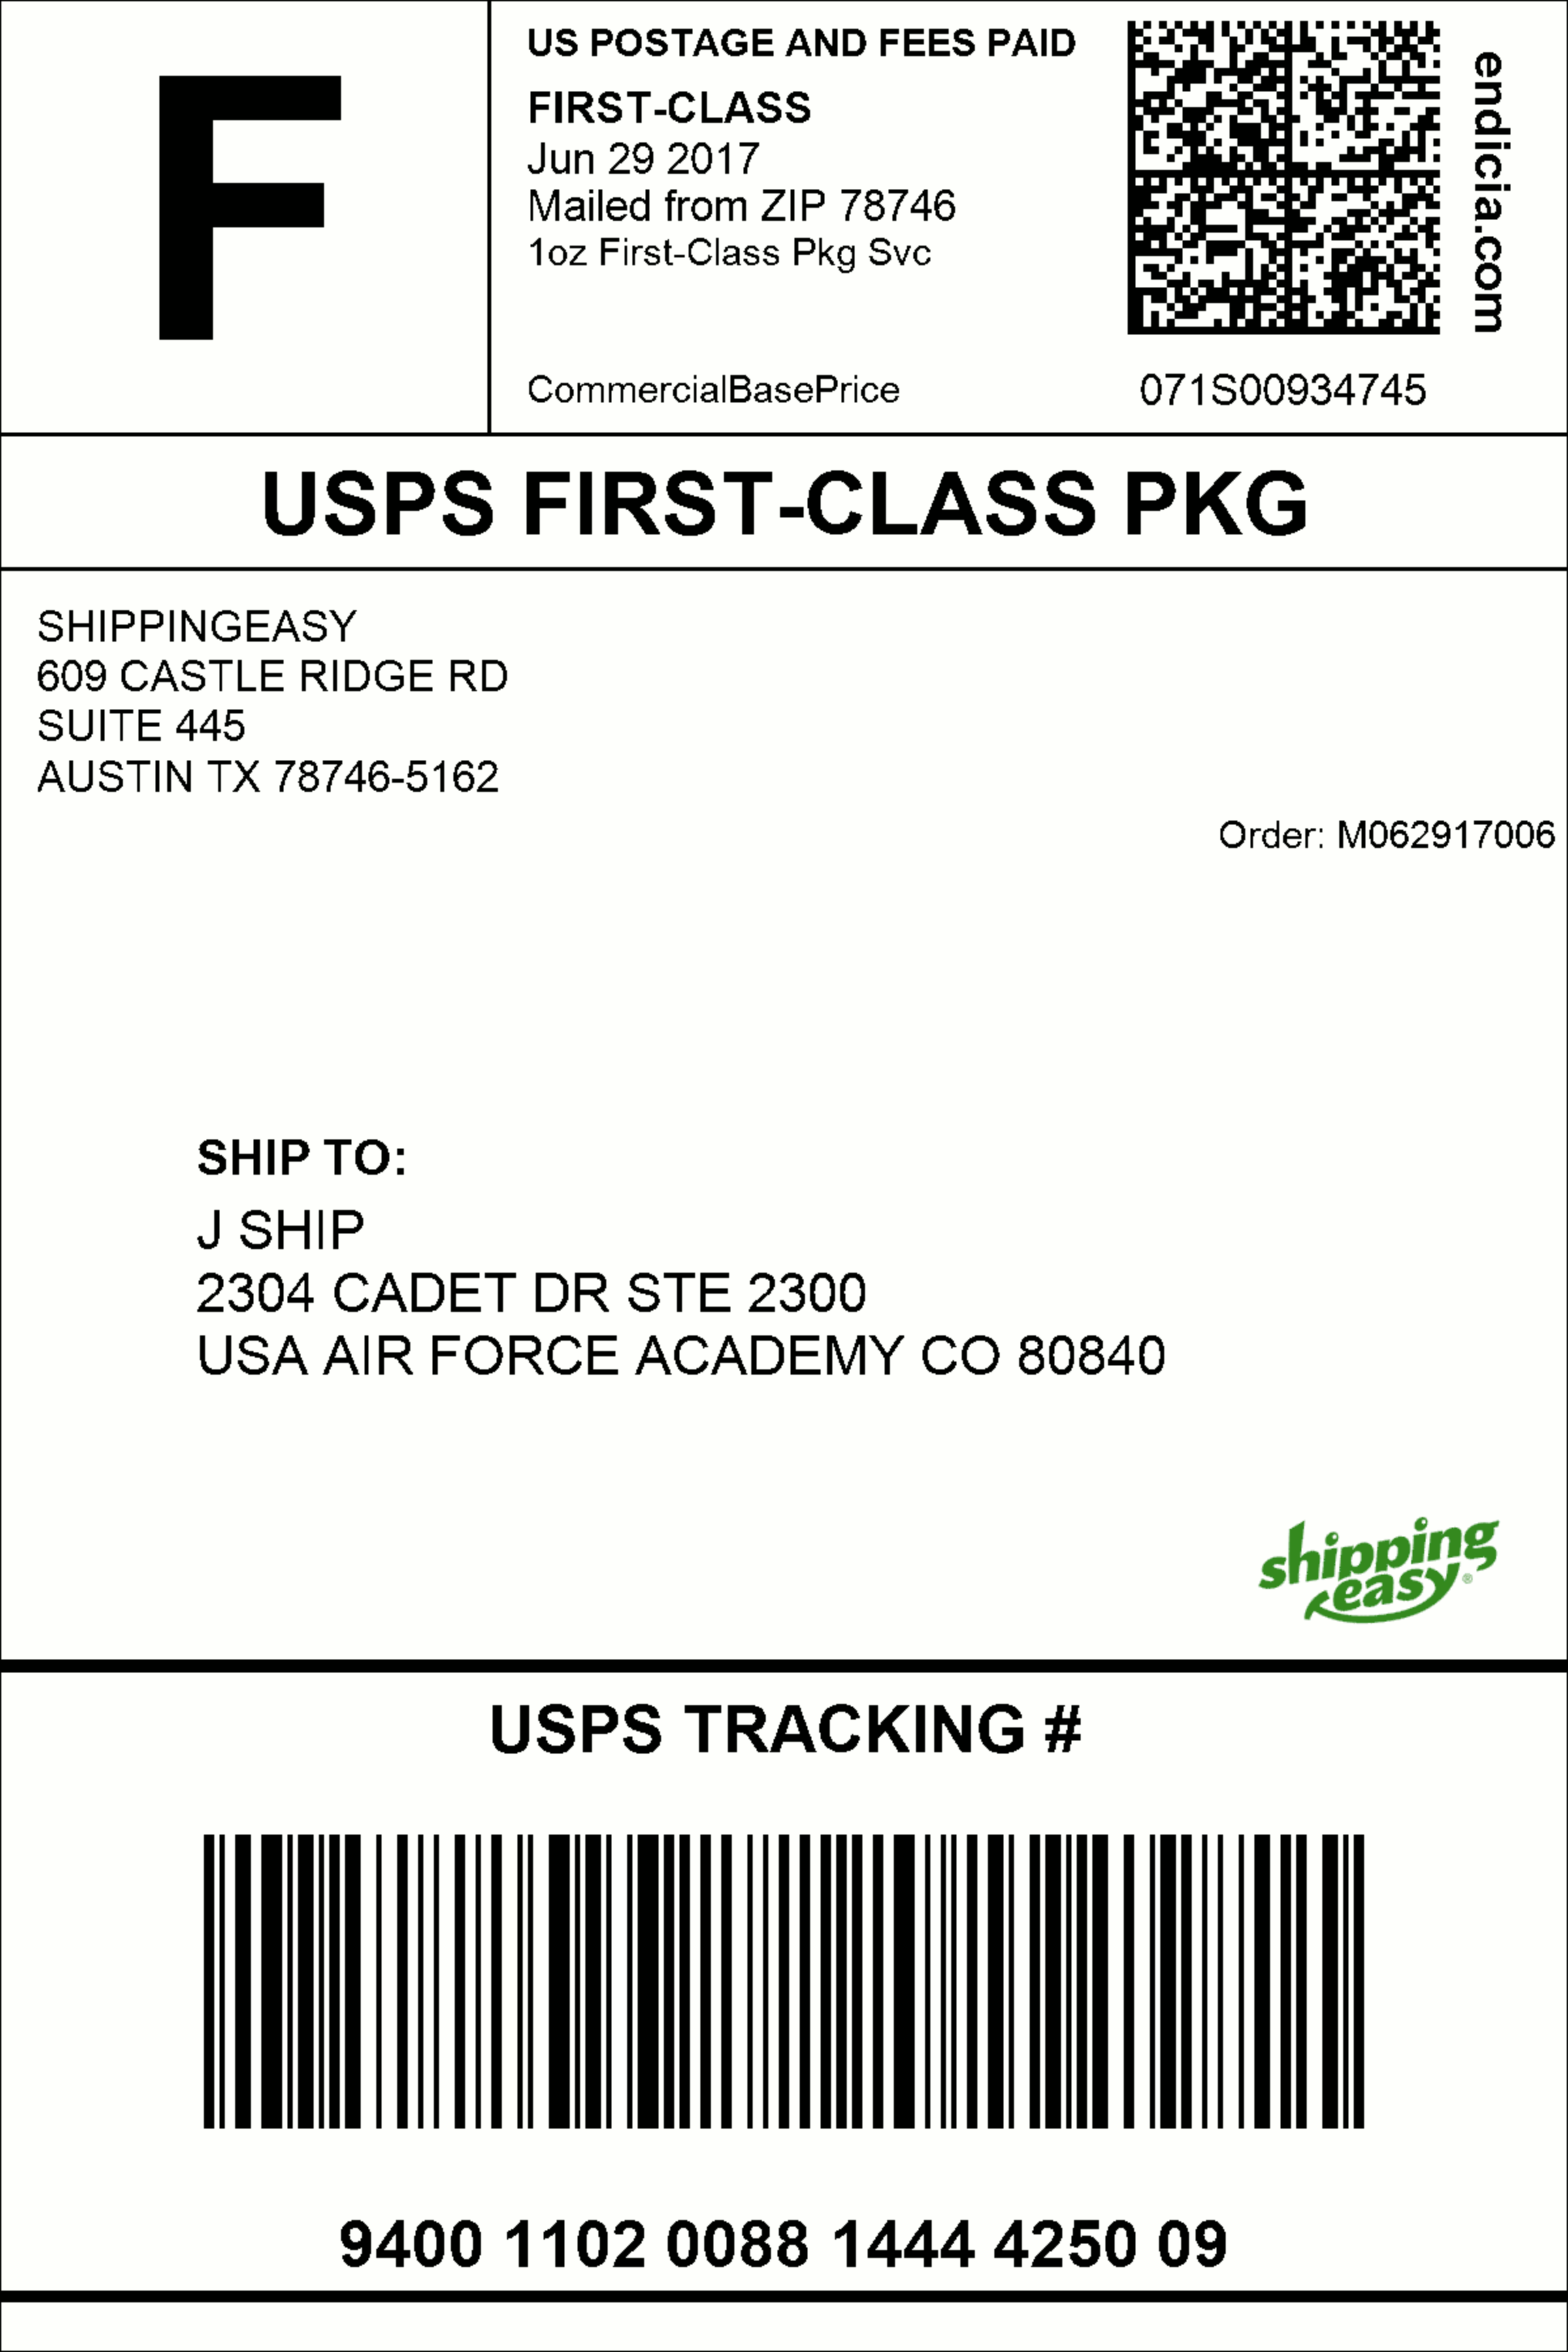 How to: Add my logo to shipping labels – ShippingEasy Knowledge Base